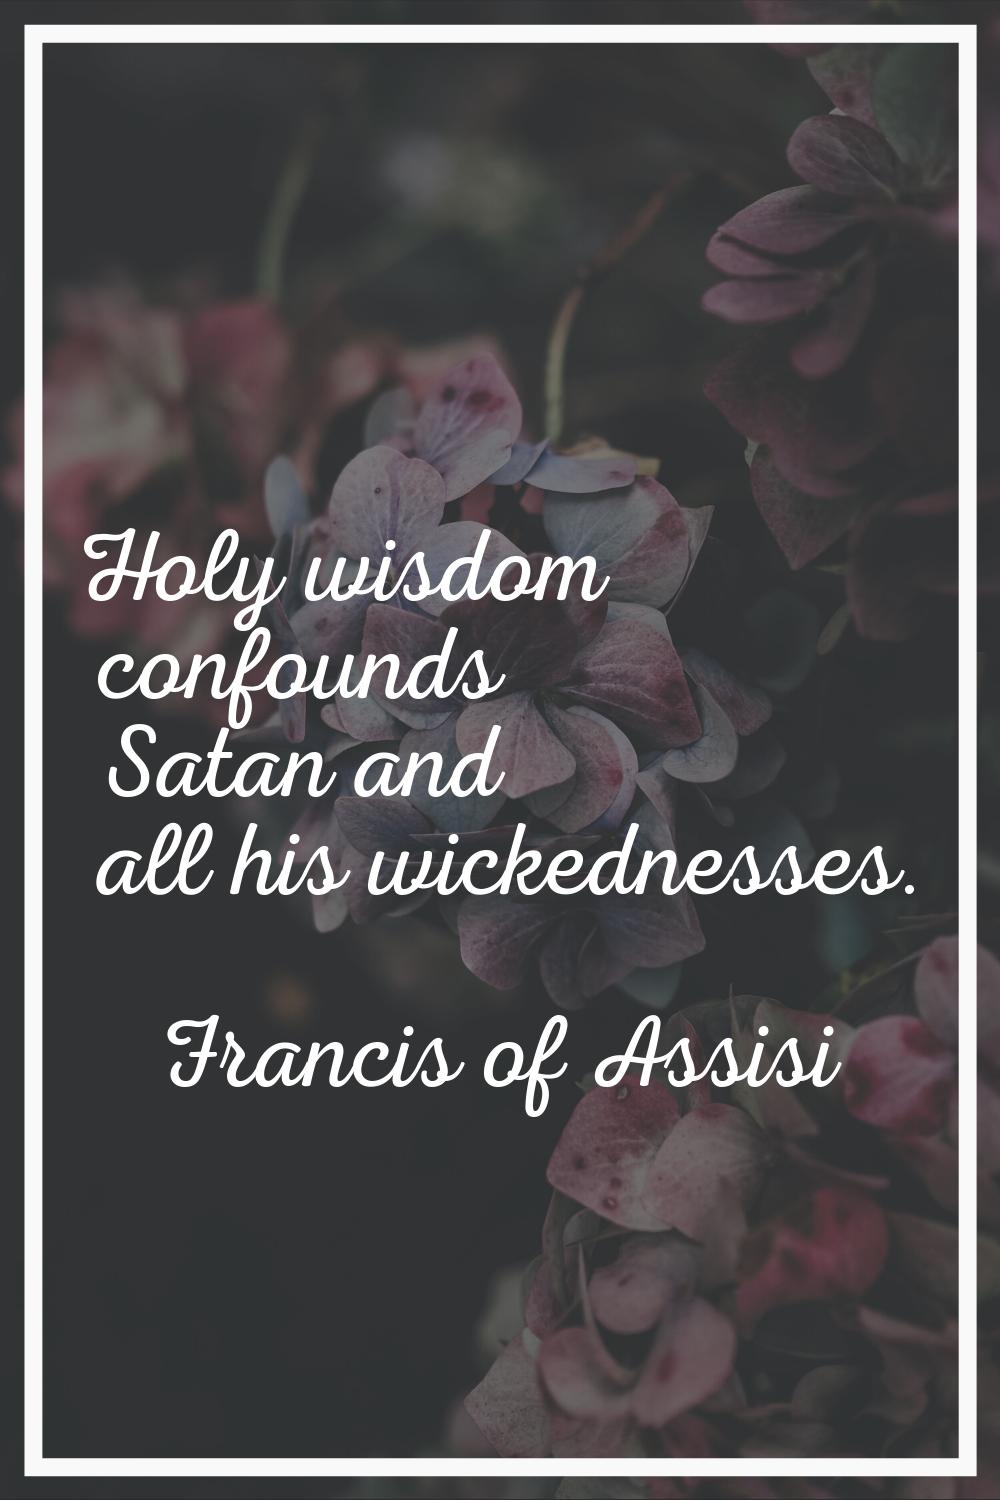 Holy wisdom confounds Satan and all his wickednesses.